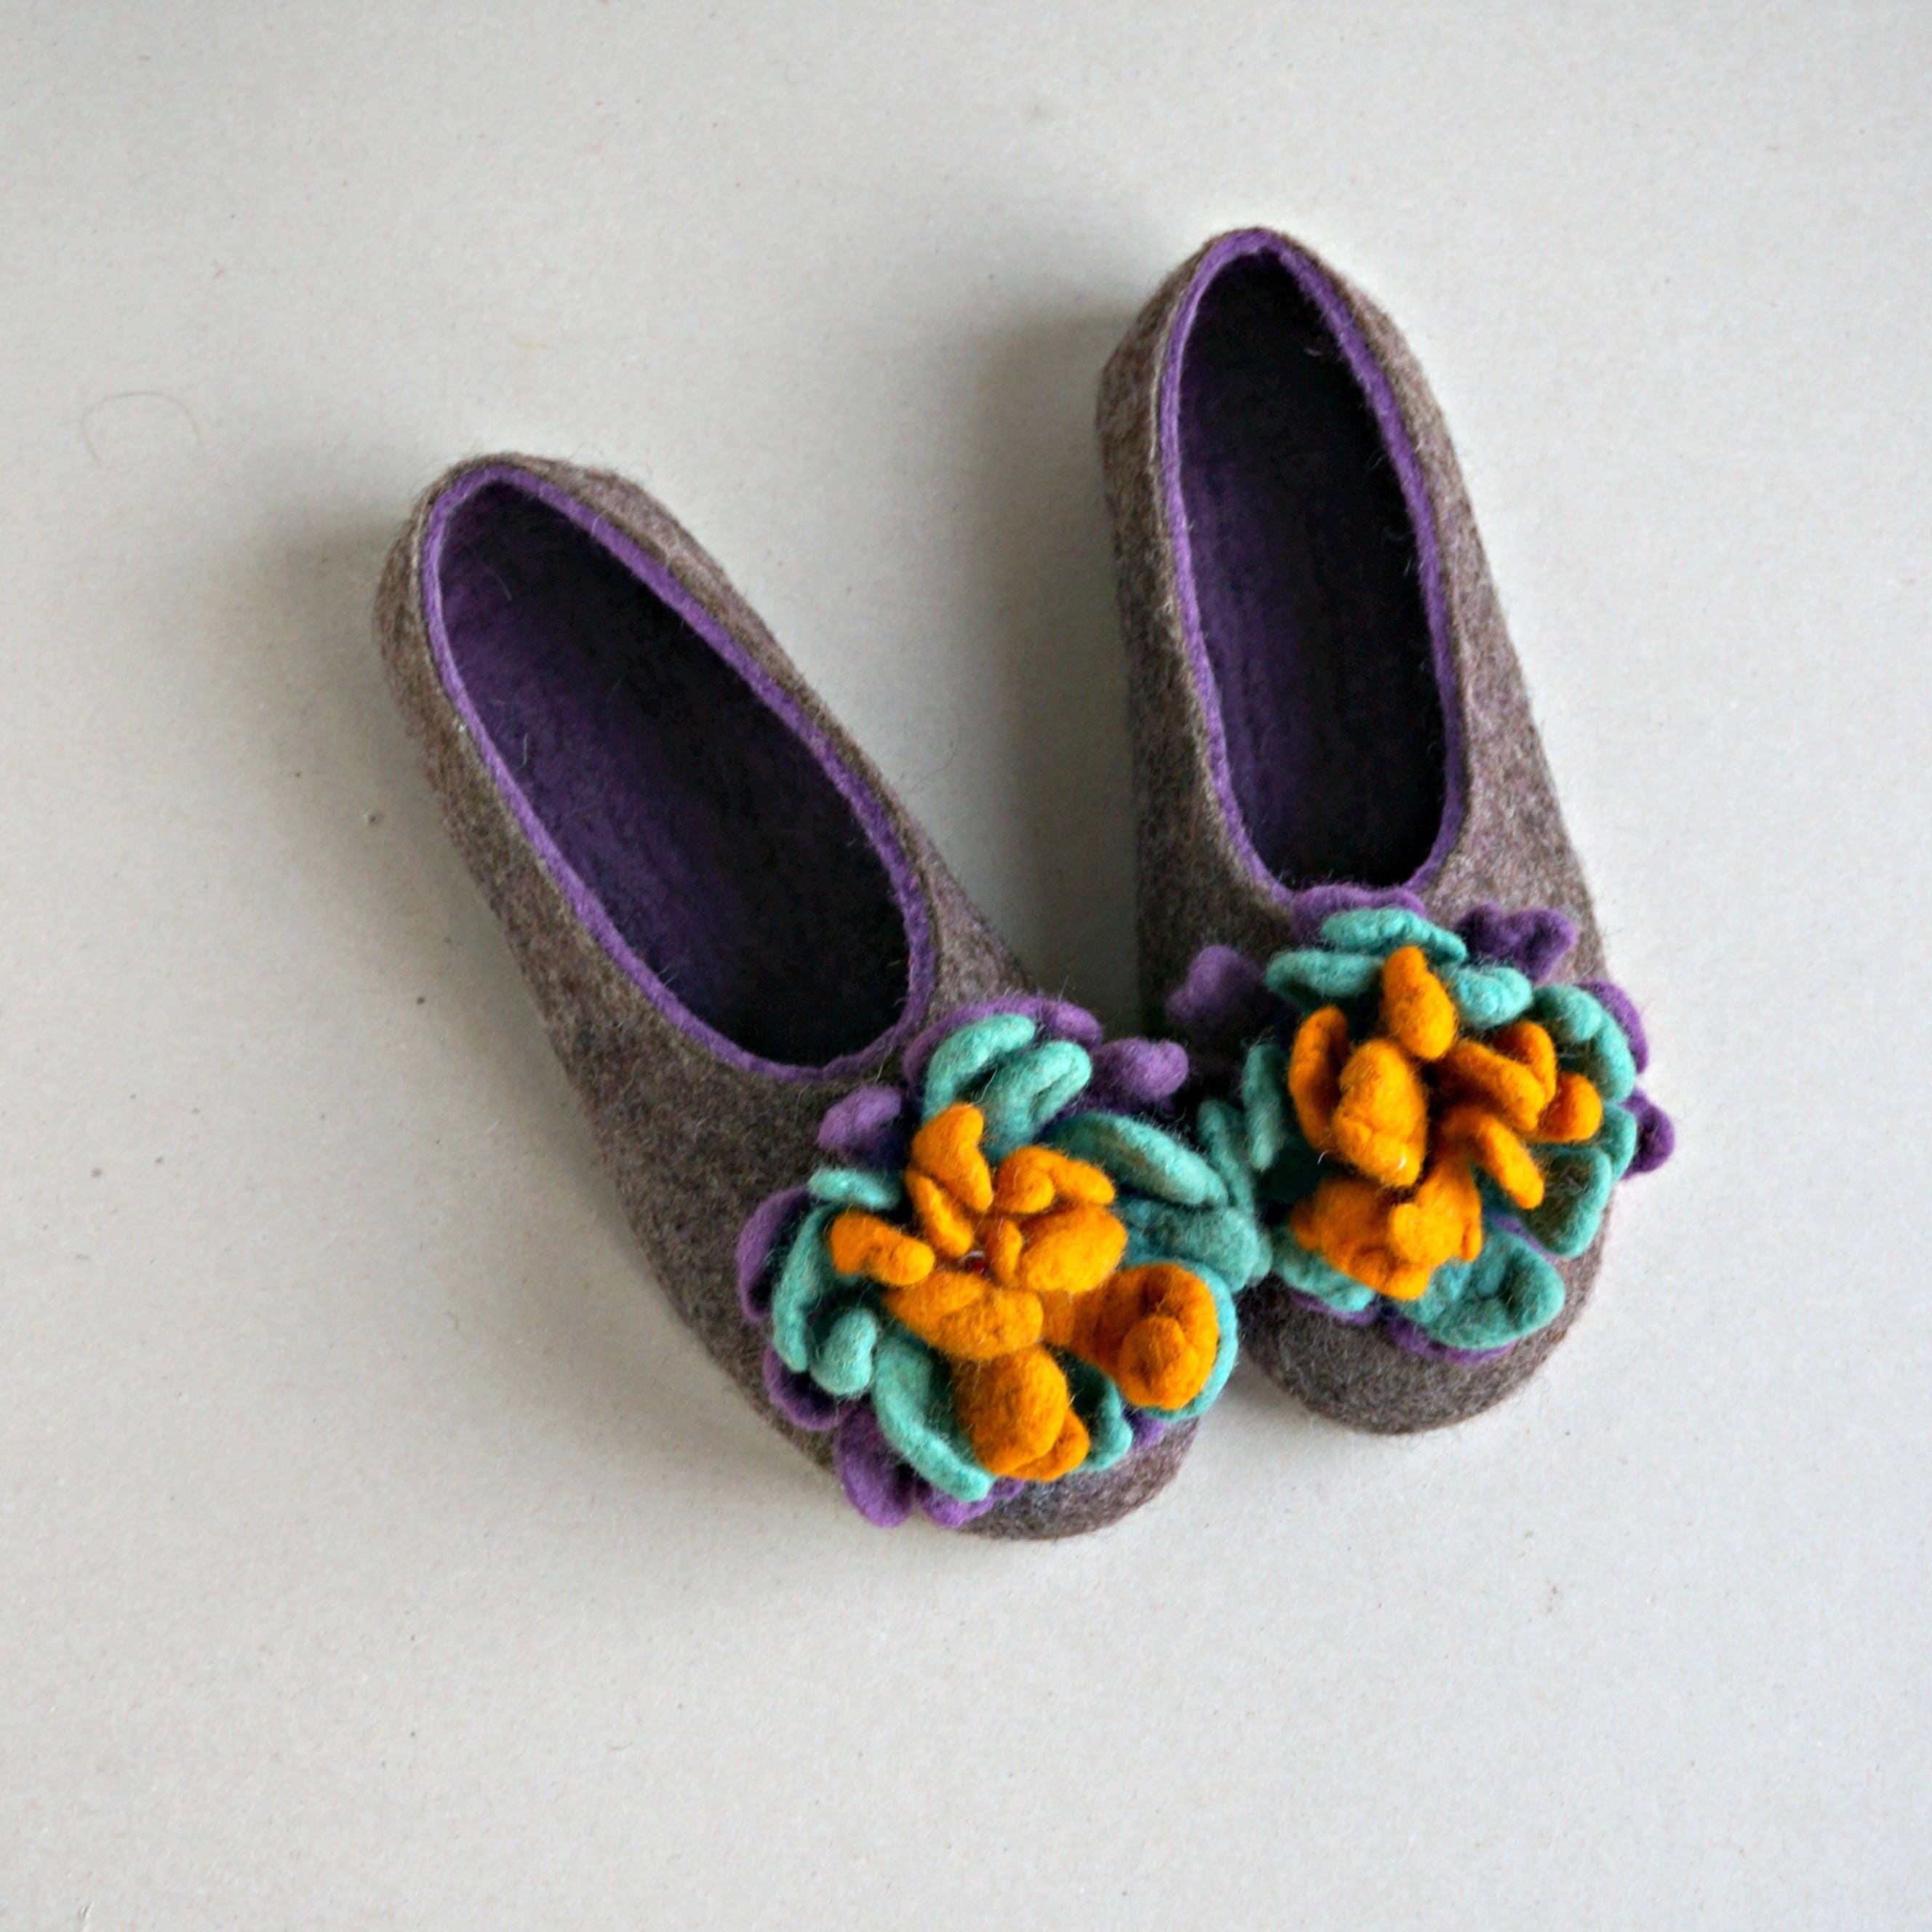 Felt Clogs for Women in Grey and Purple with Felted Wool | Etsy